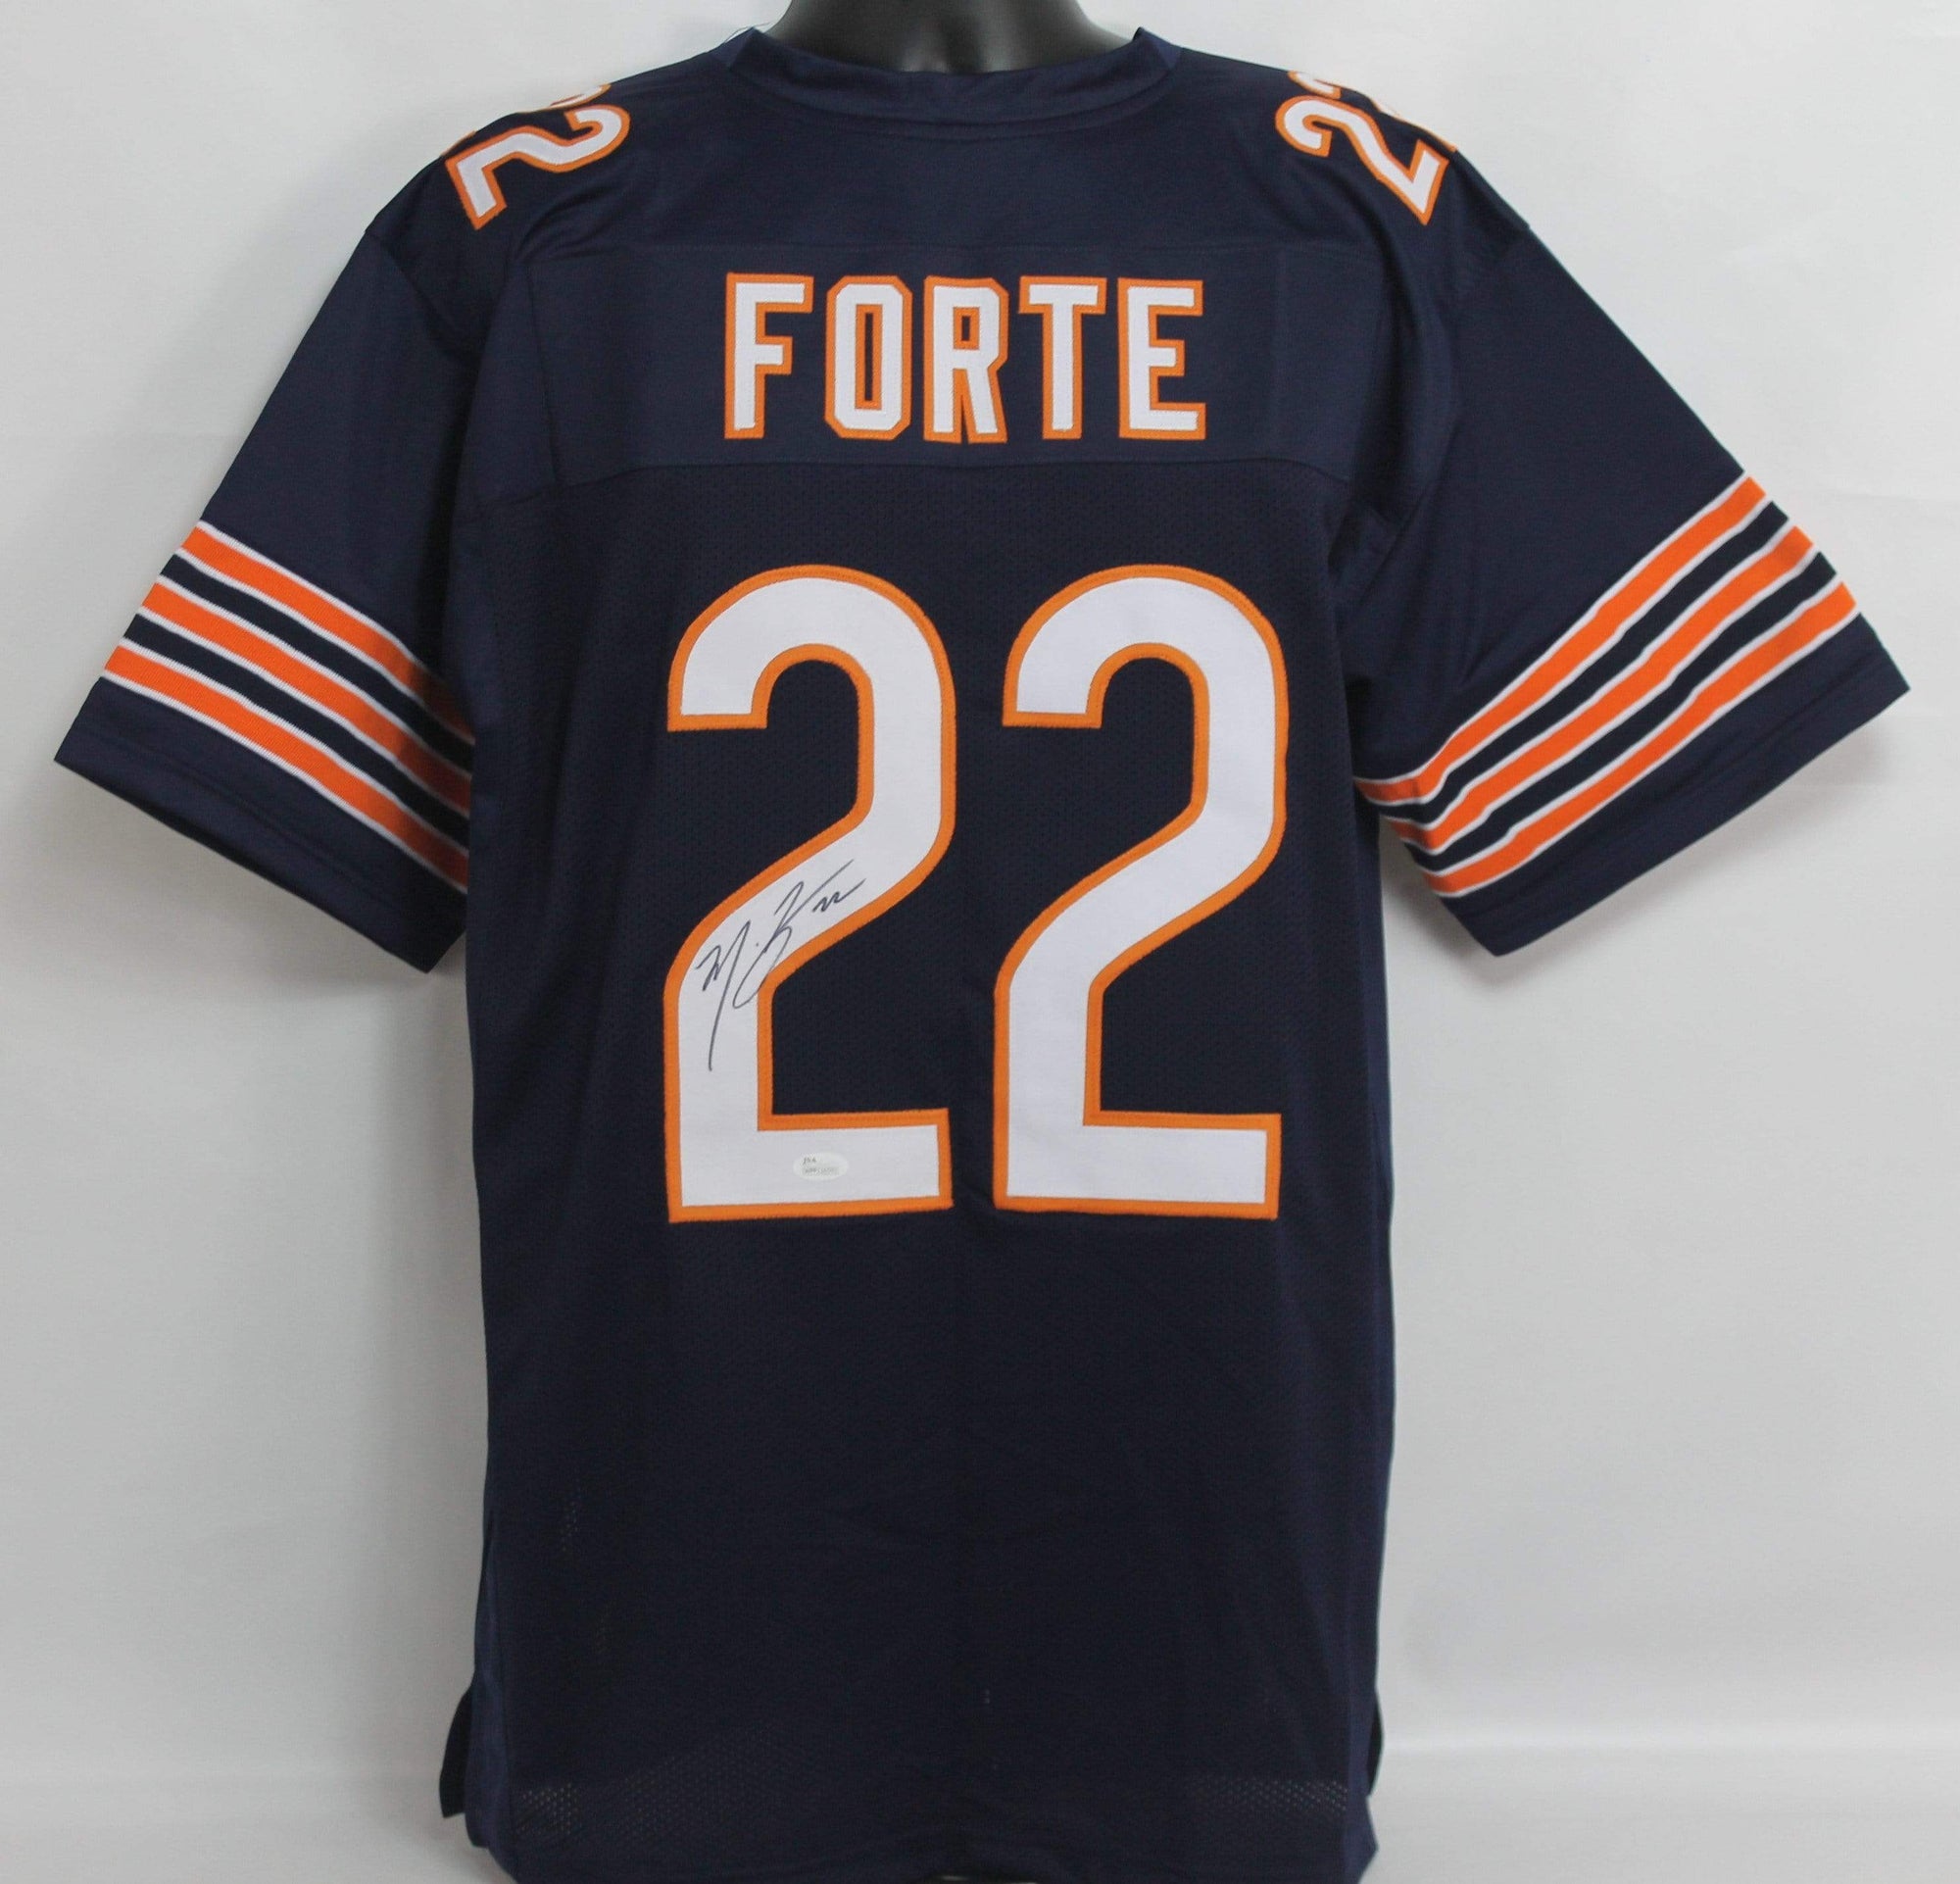 forte throwback jersey